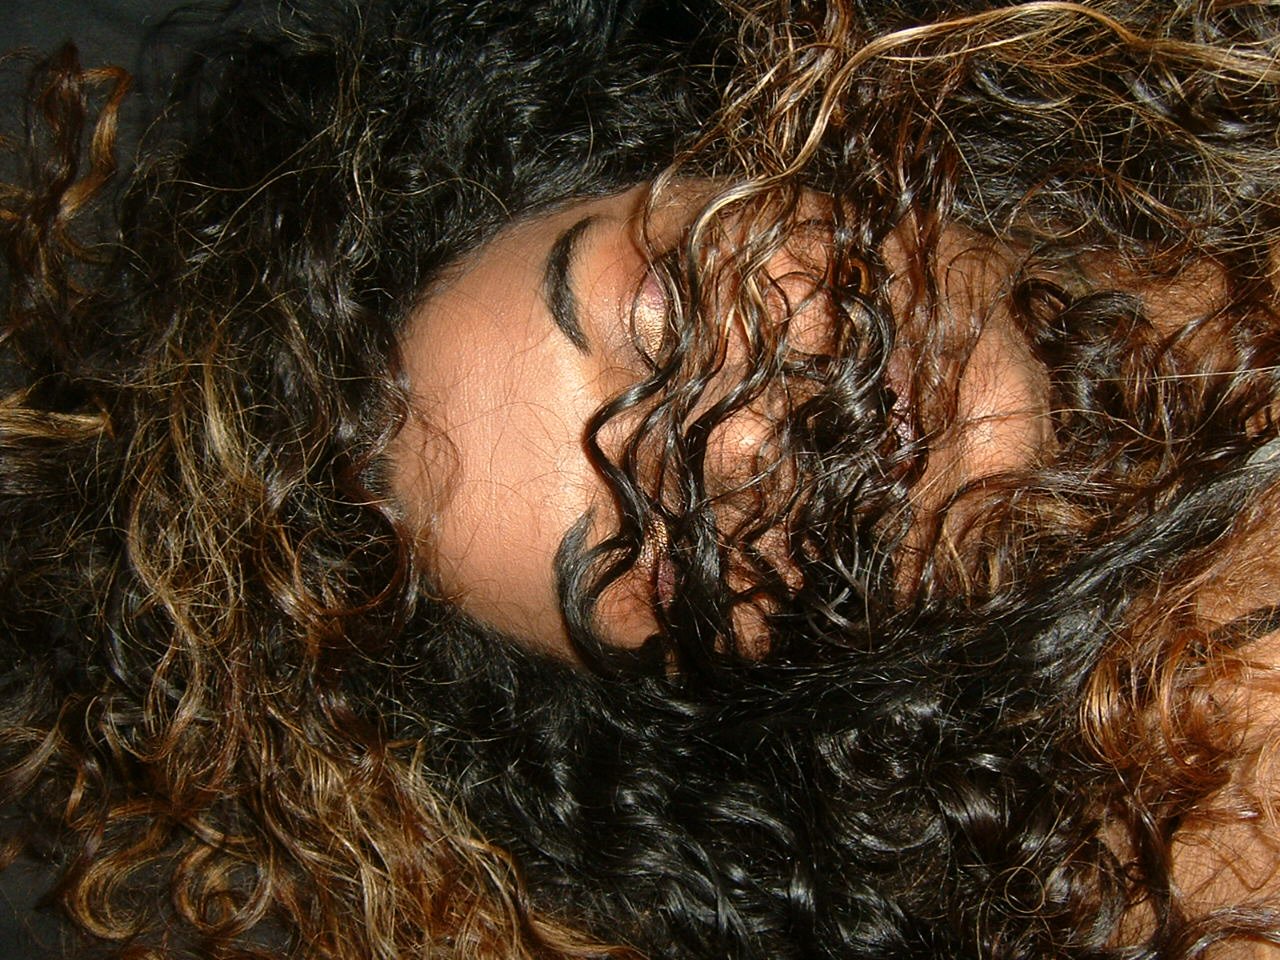 there is a young woman with curly hair laying down